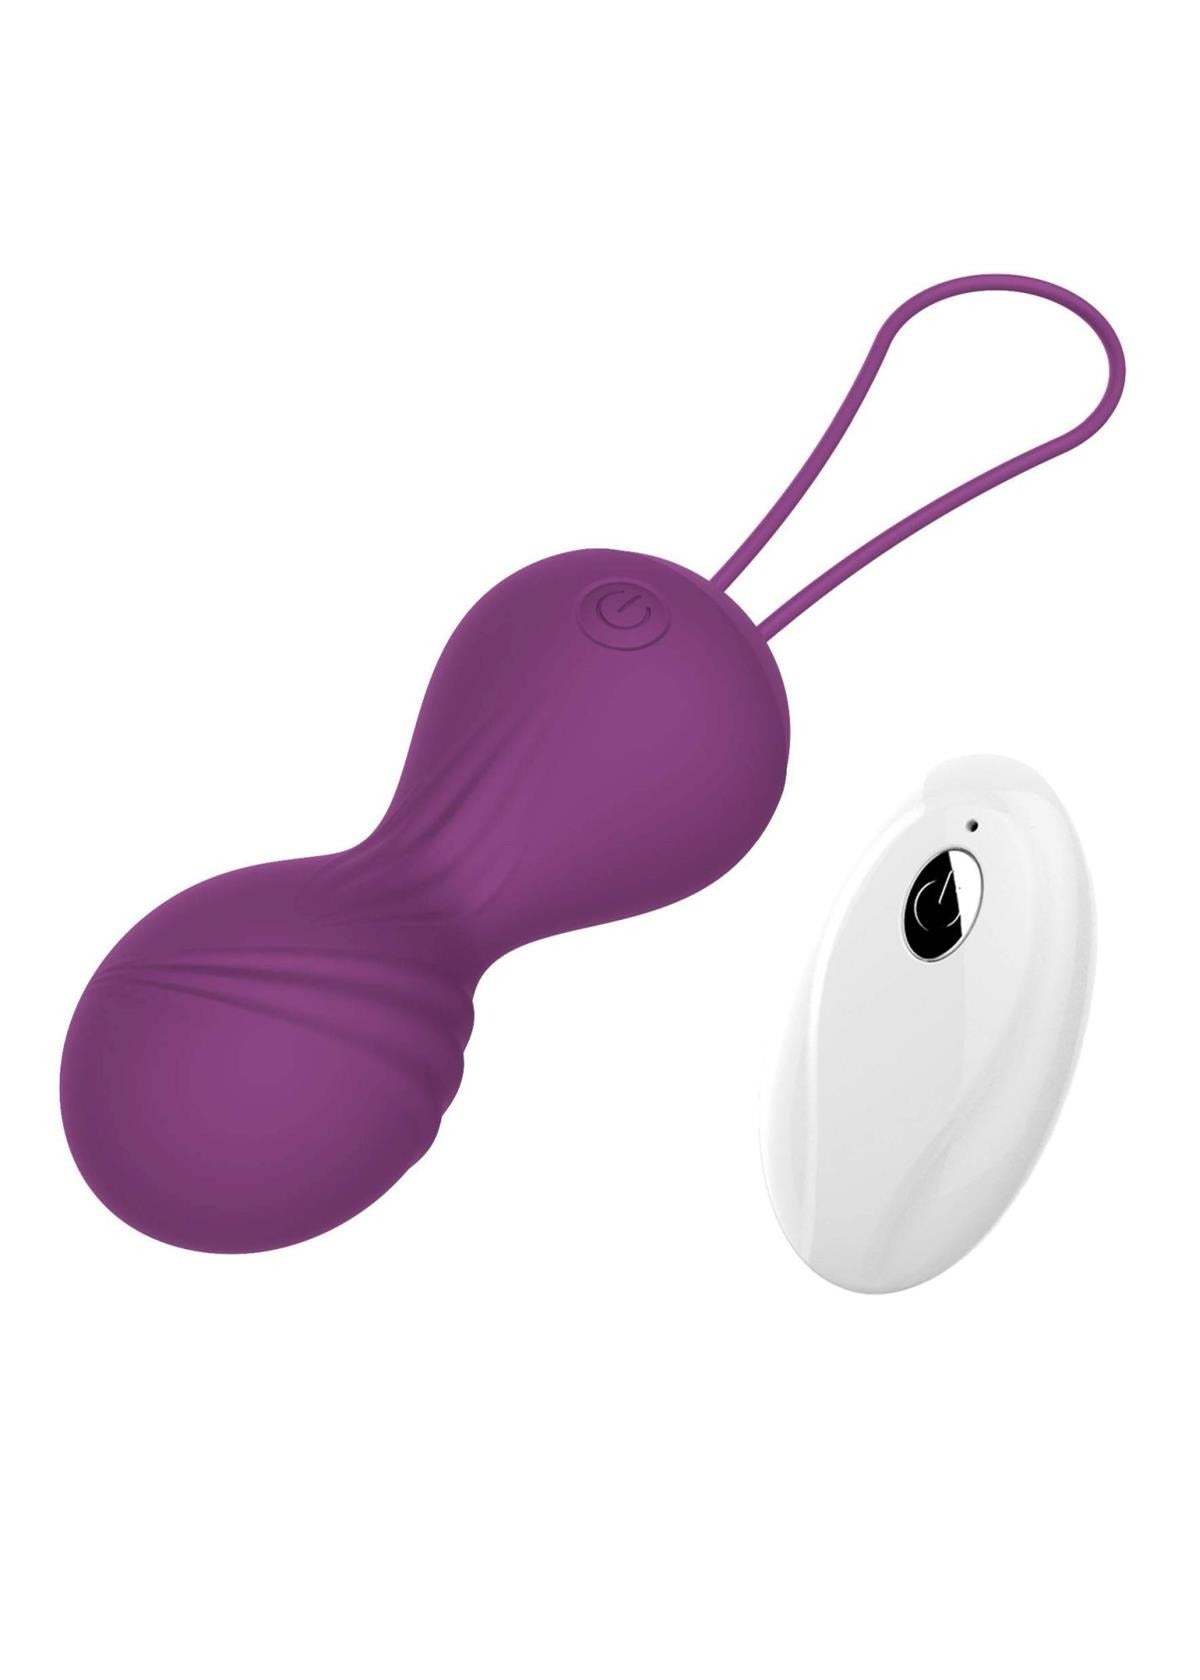 Bossoftoys Silicone Kegel Vibrator - Purple - 10 Functions - Remote Rechargeable - 22-00038